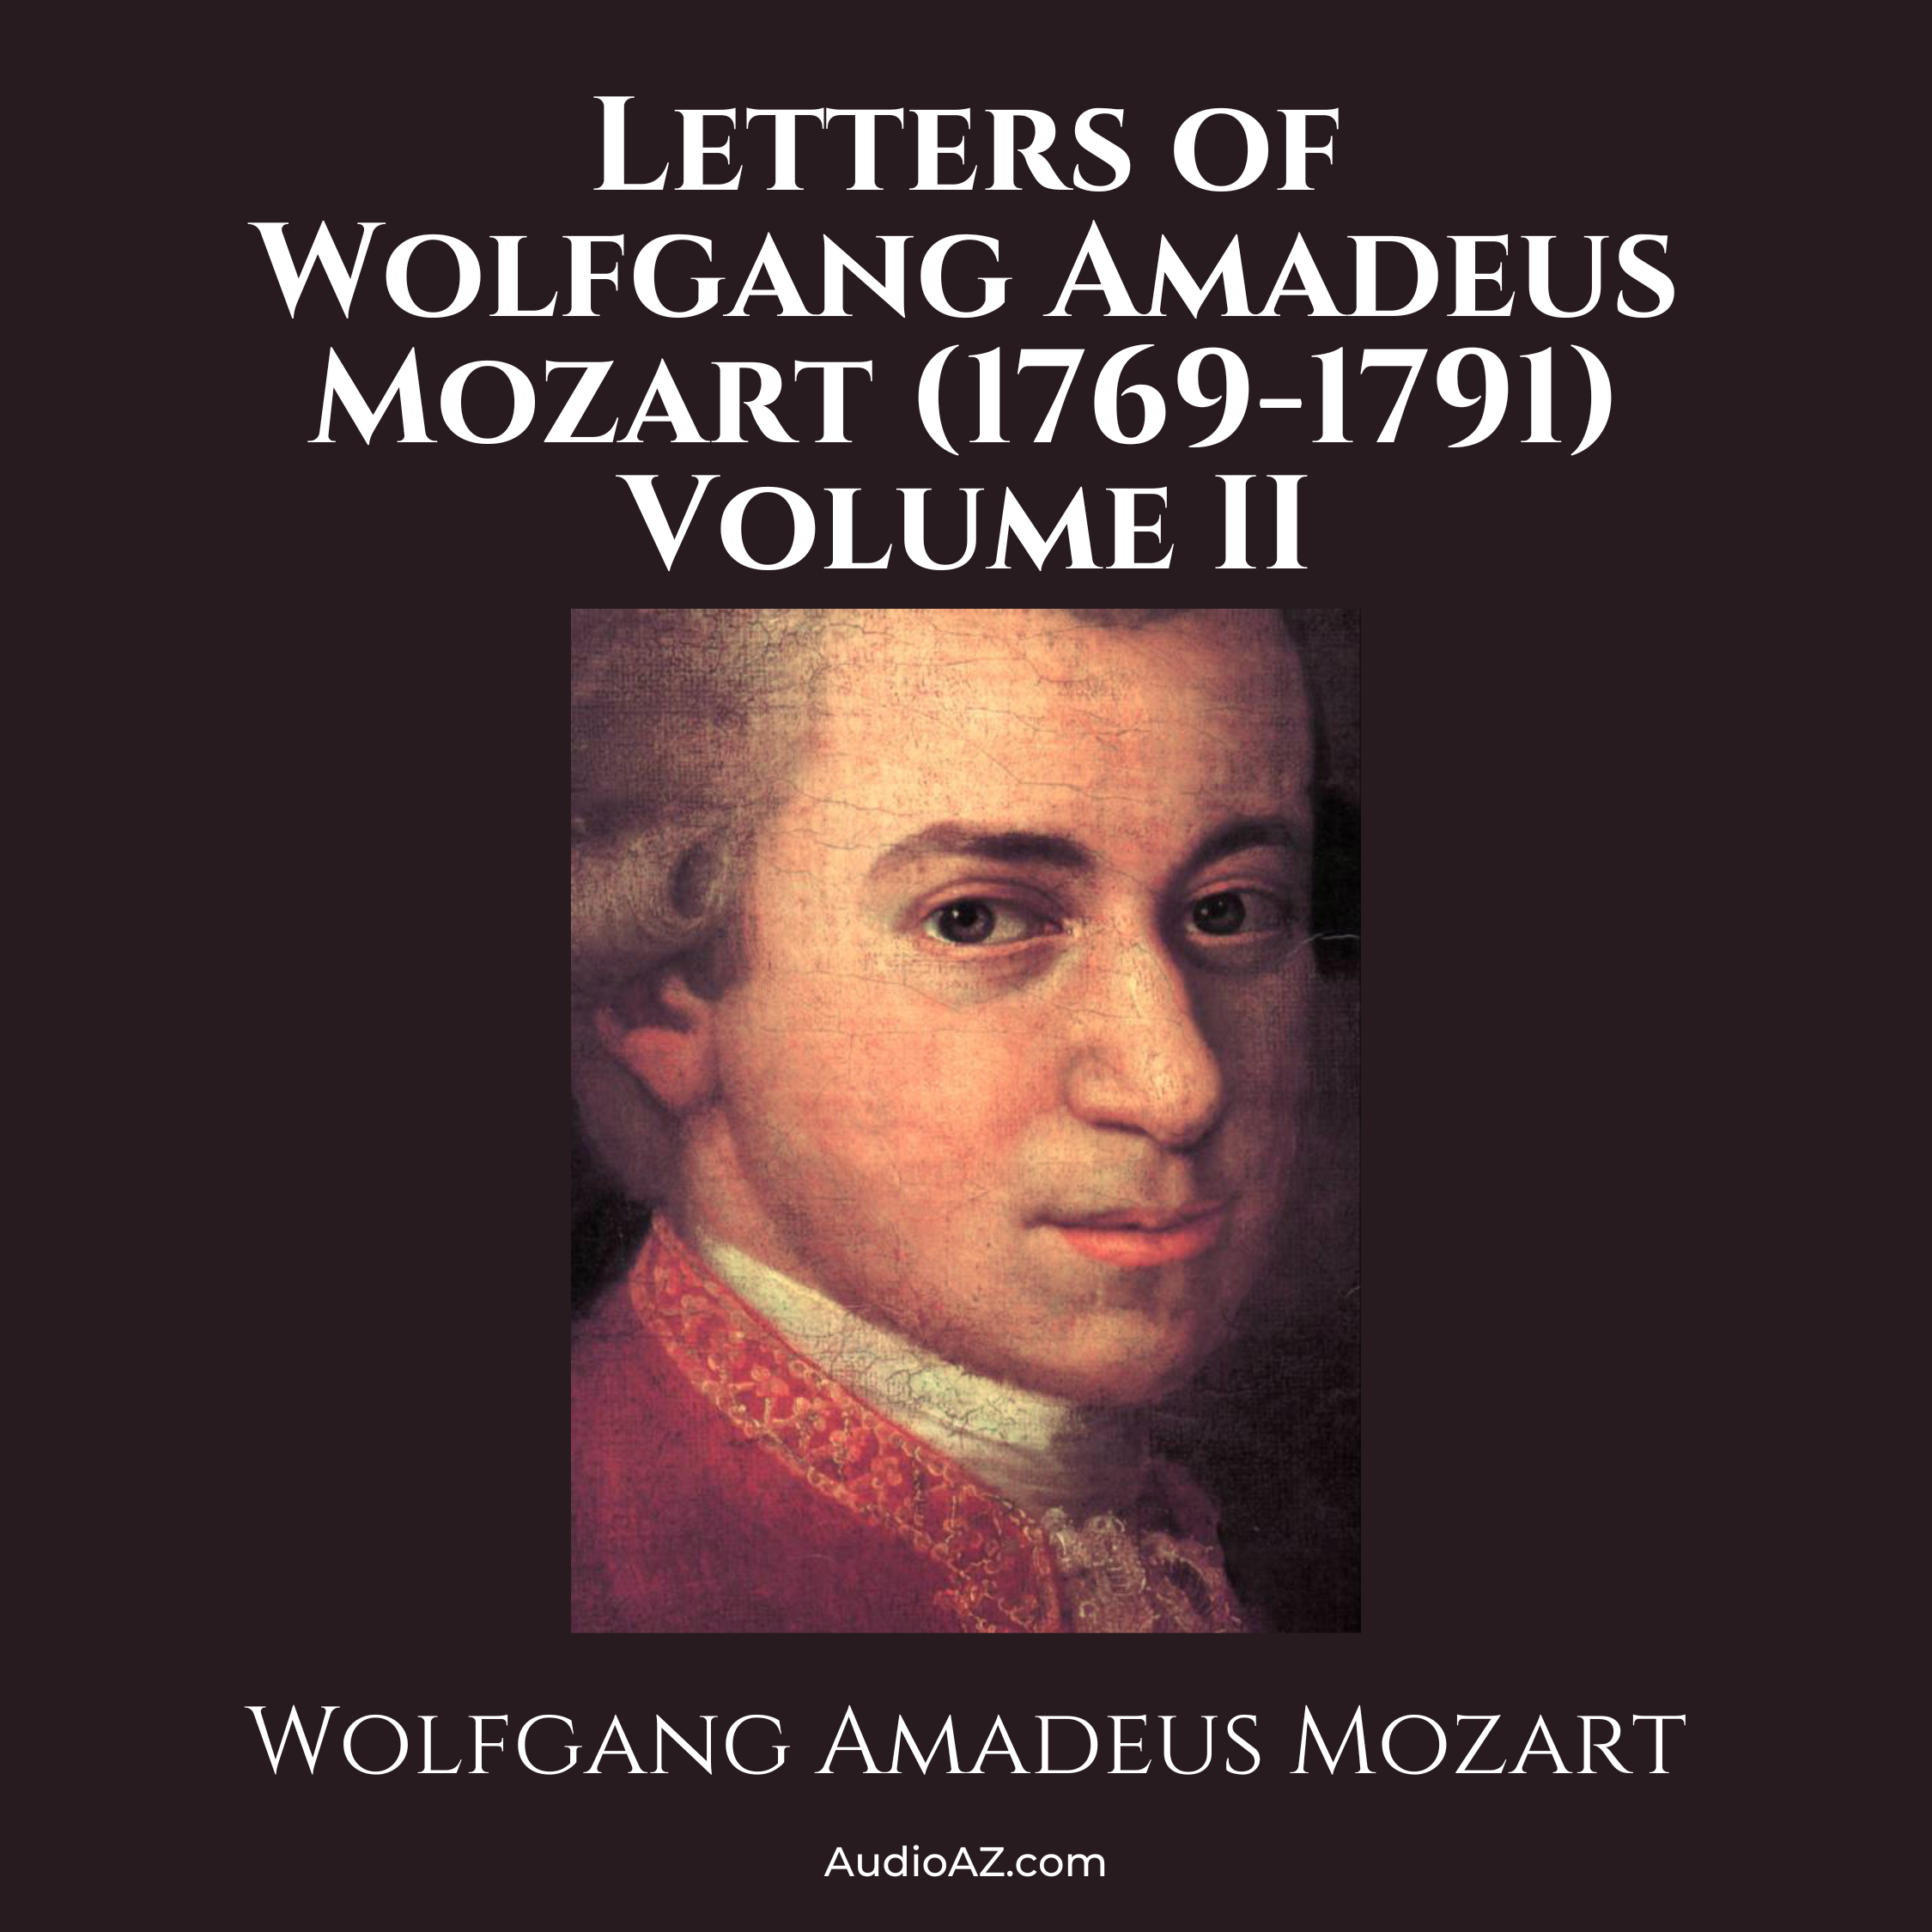 Letters of Wolfgang Amadeus Mozart, Volume II cover